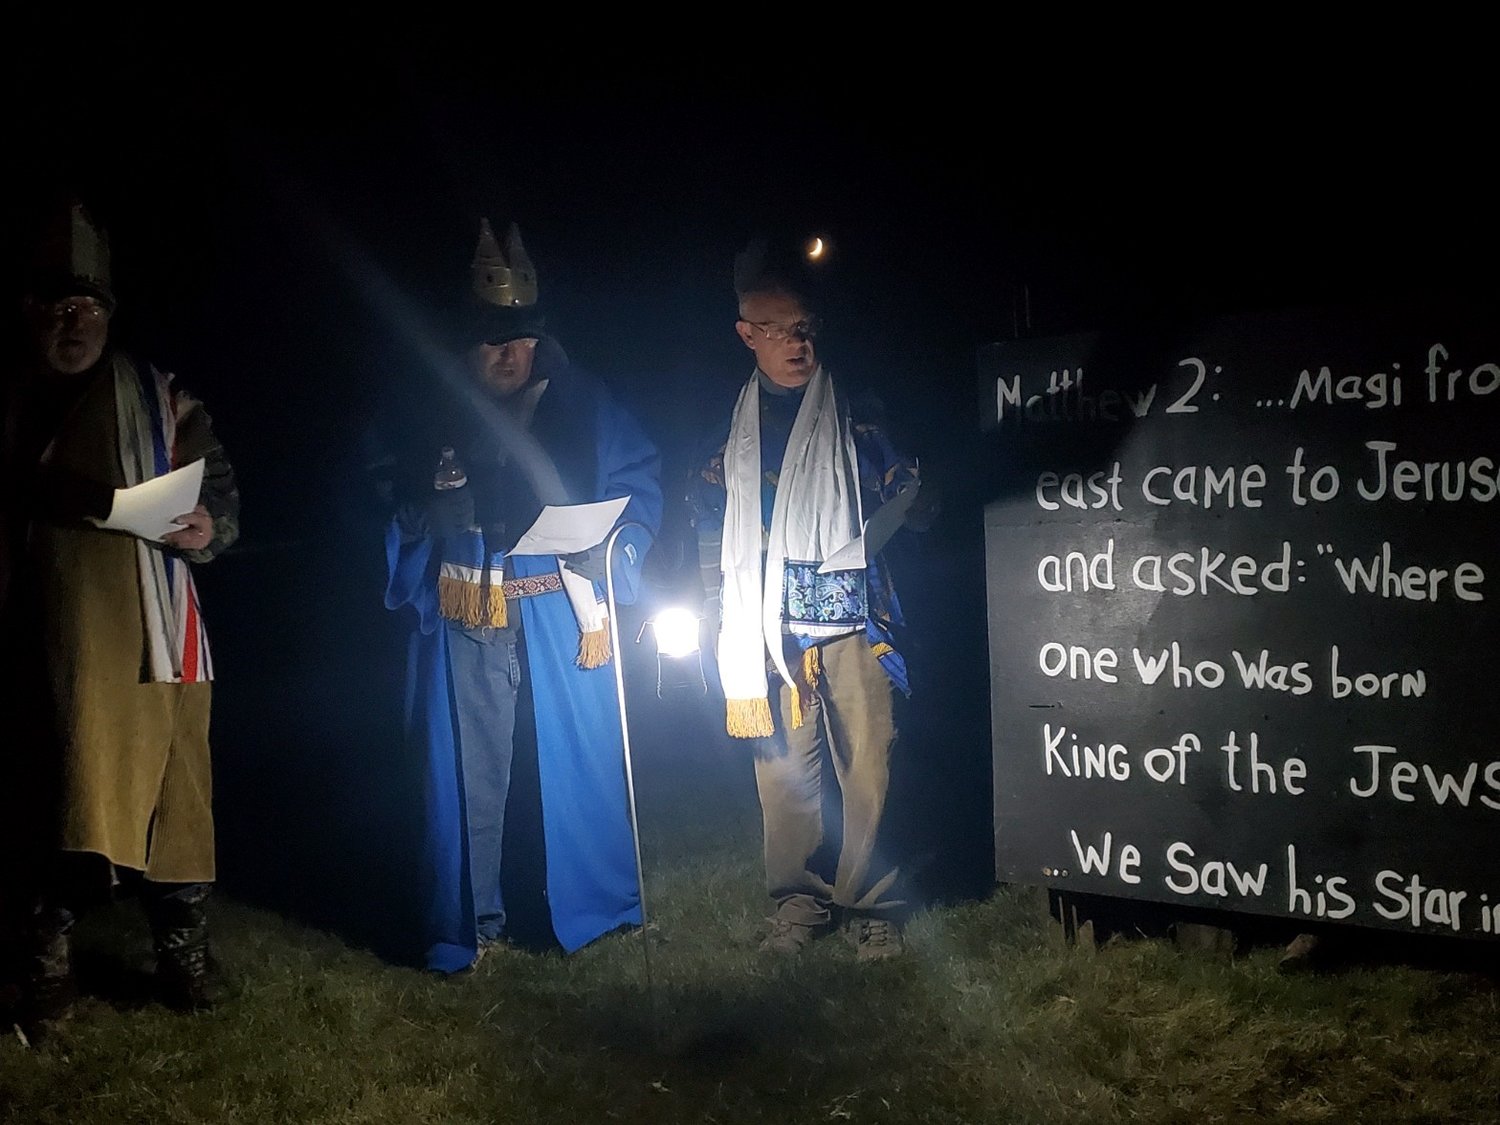 Sign boards and members in costume shared the message of Christ's birth with those that drove through the live nativity event.